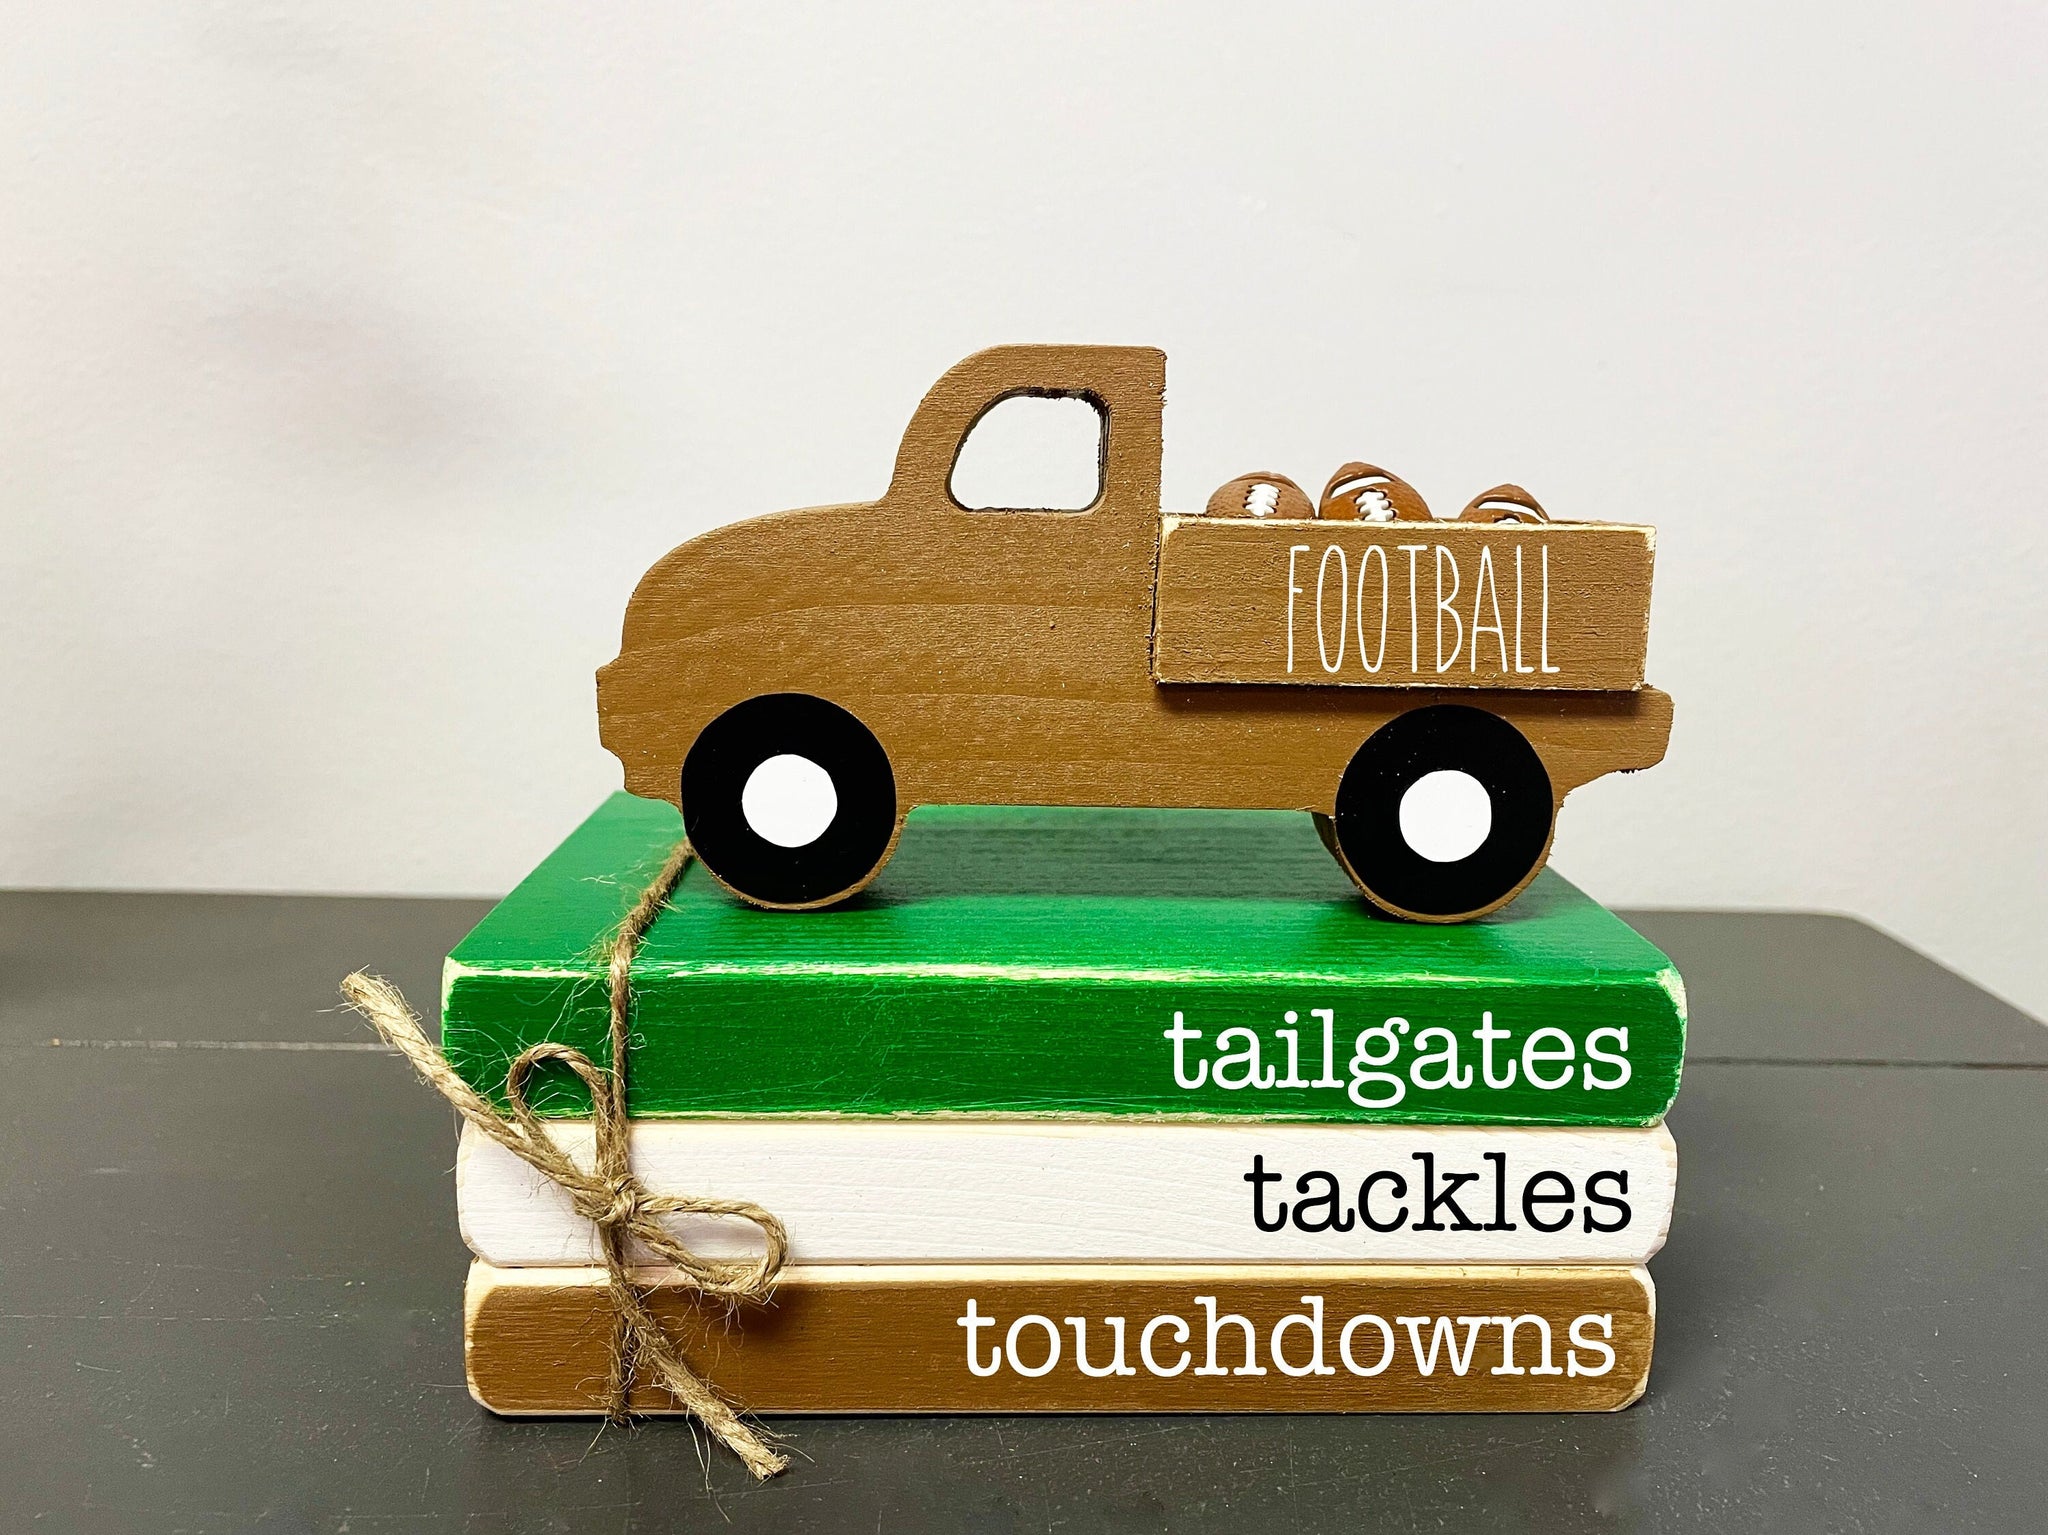 Football decor, Truck, Tiered tray decor, Mini book bundle, Book stack, Wooden truck, Faux books, Tailgates, Tackles, Touchdowns